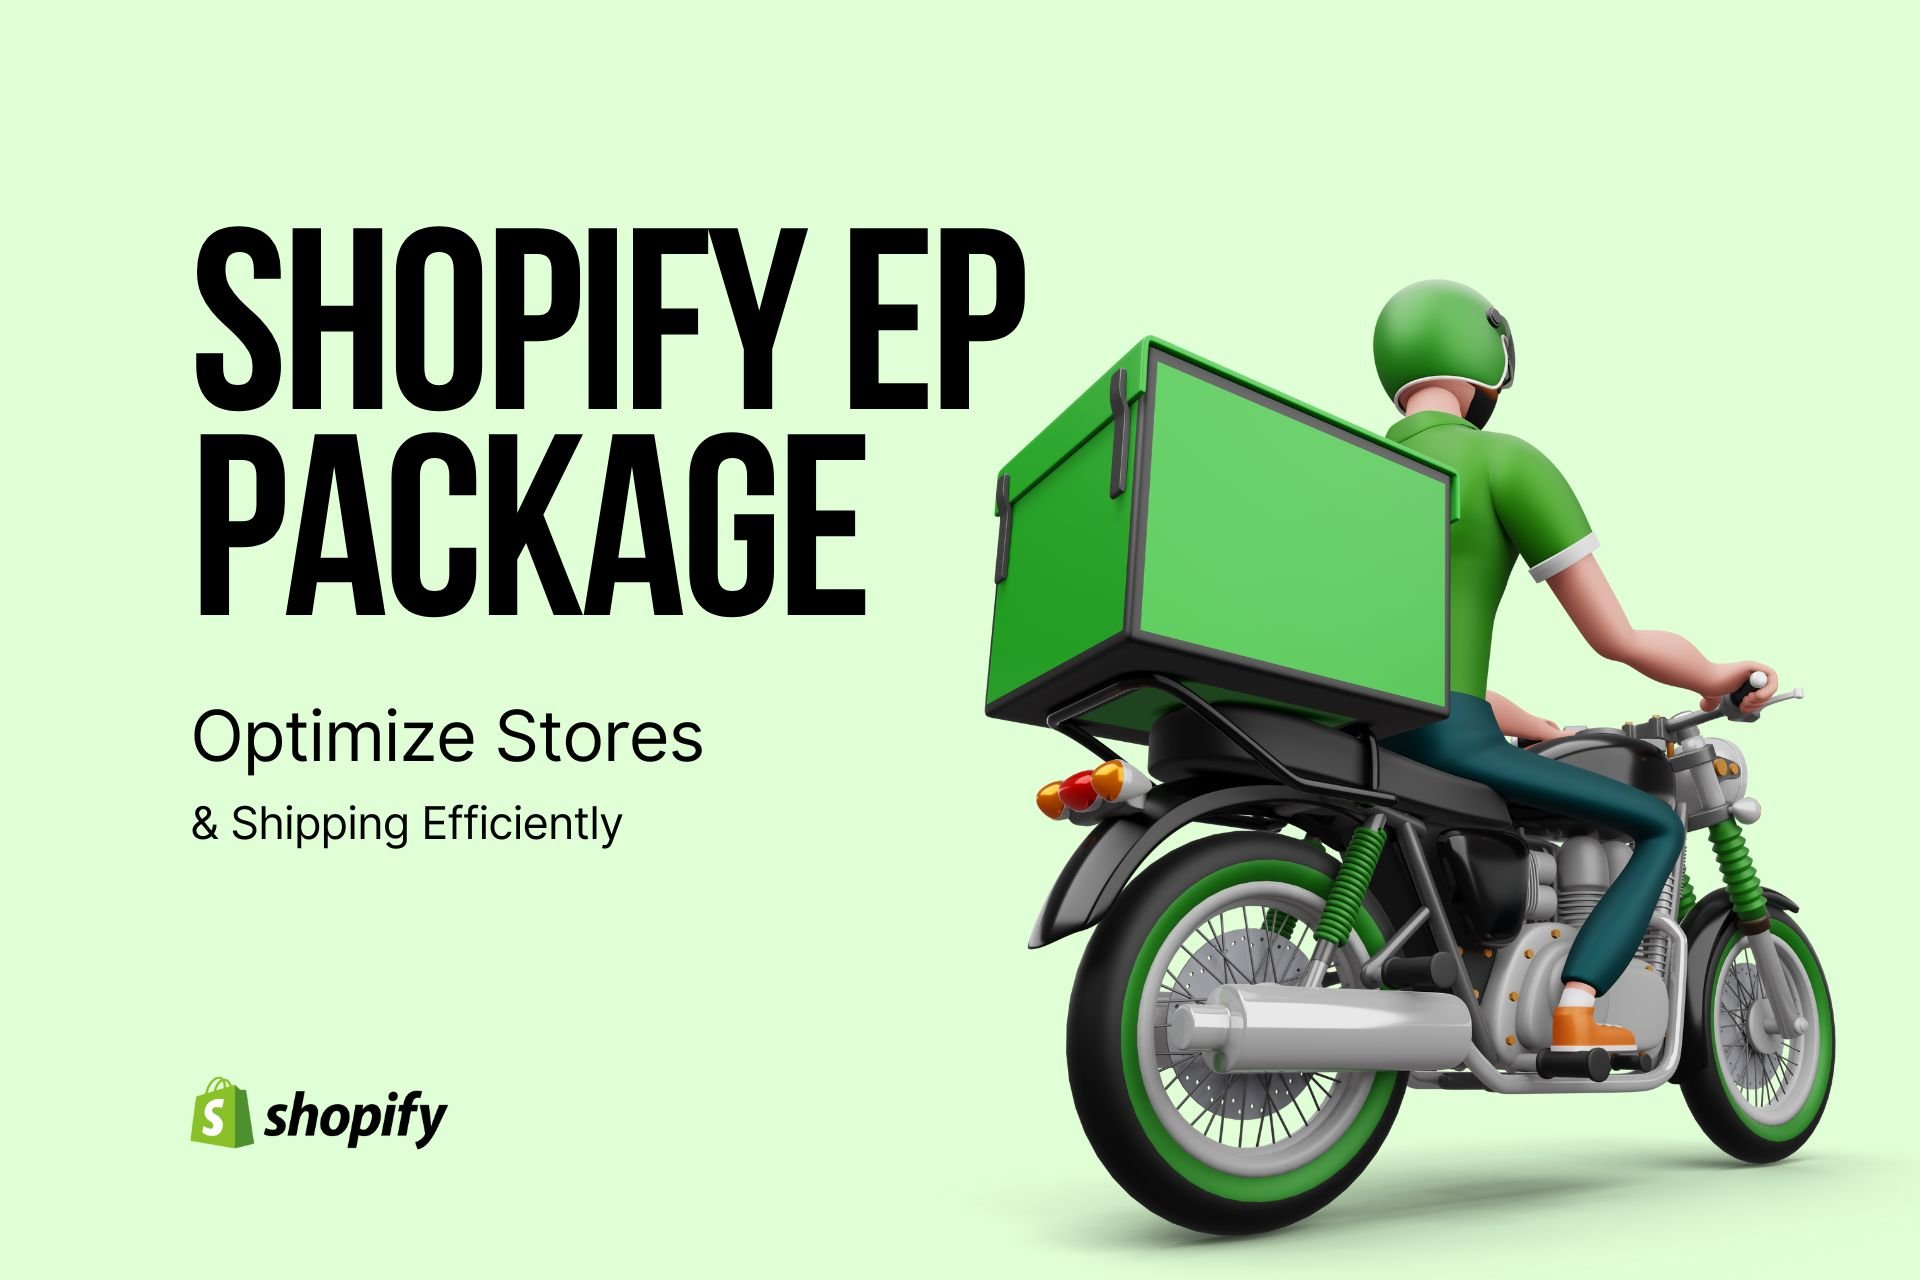 Shopify EP Package: Optimize Stores & Shipping Efficiently